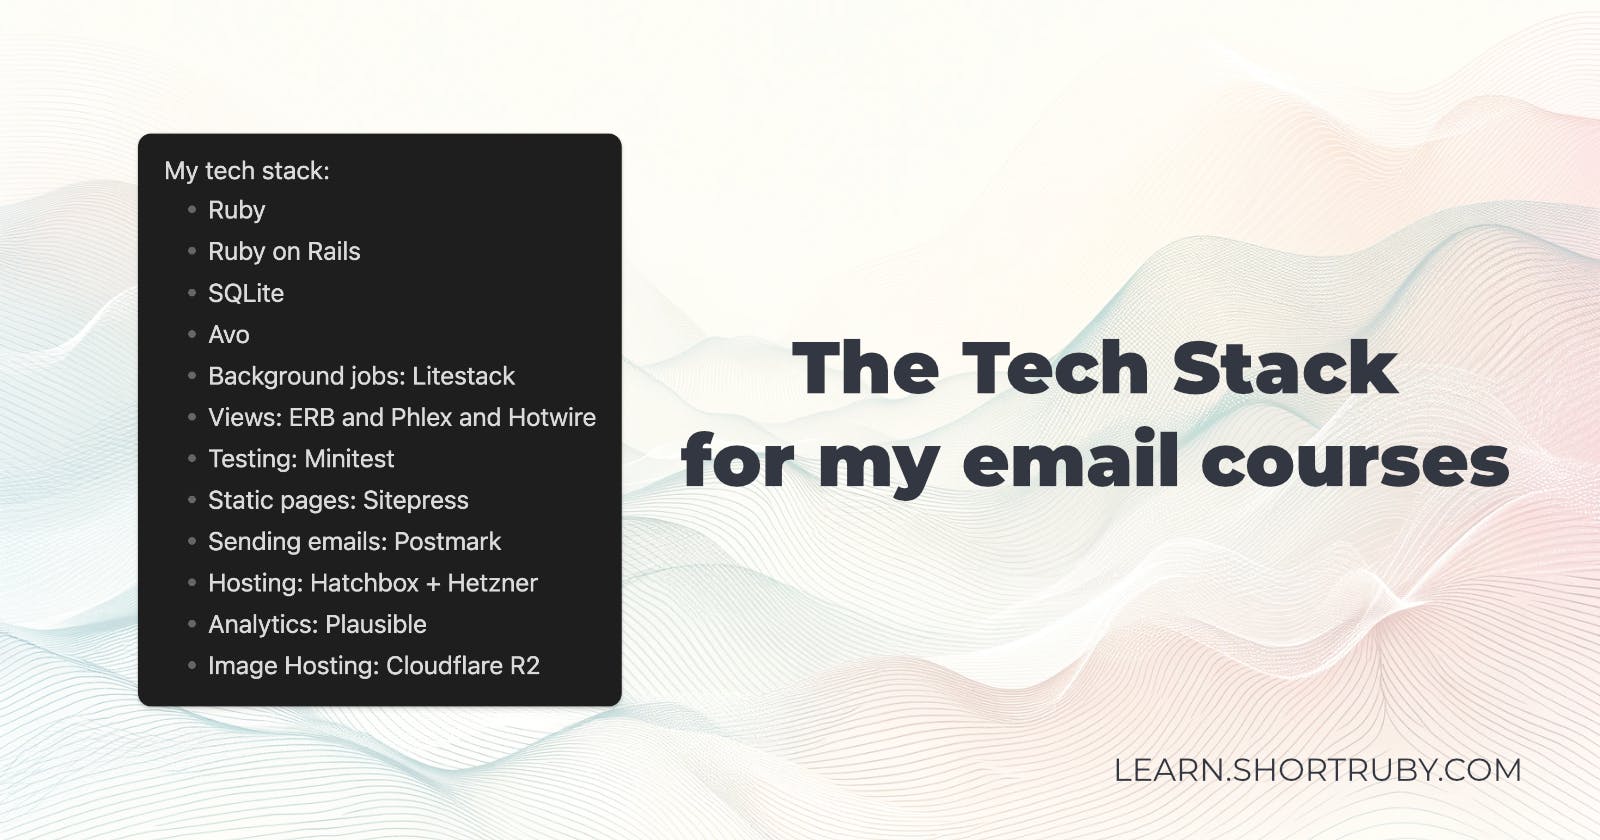 The tech stack I choose to build my email courses project